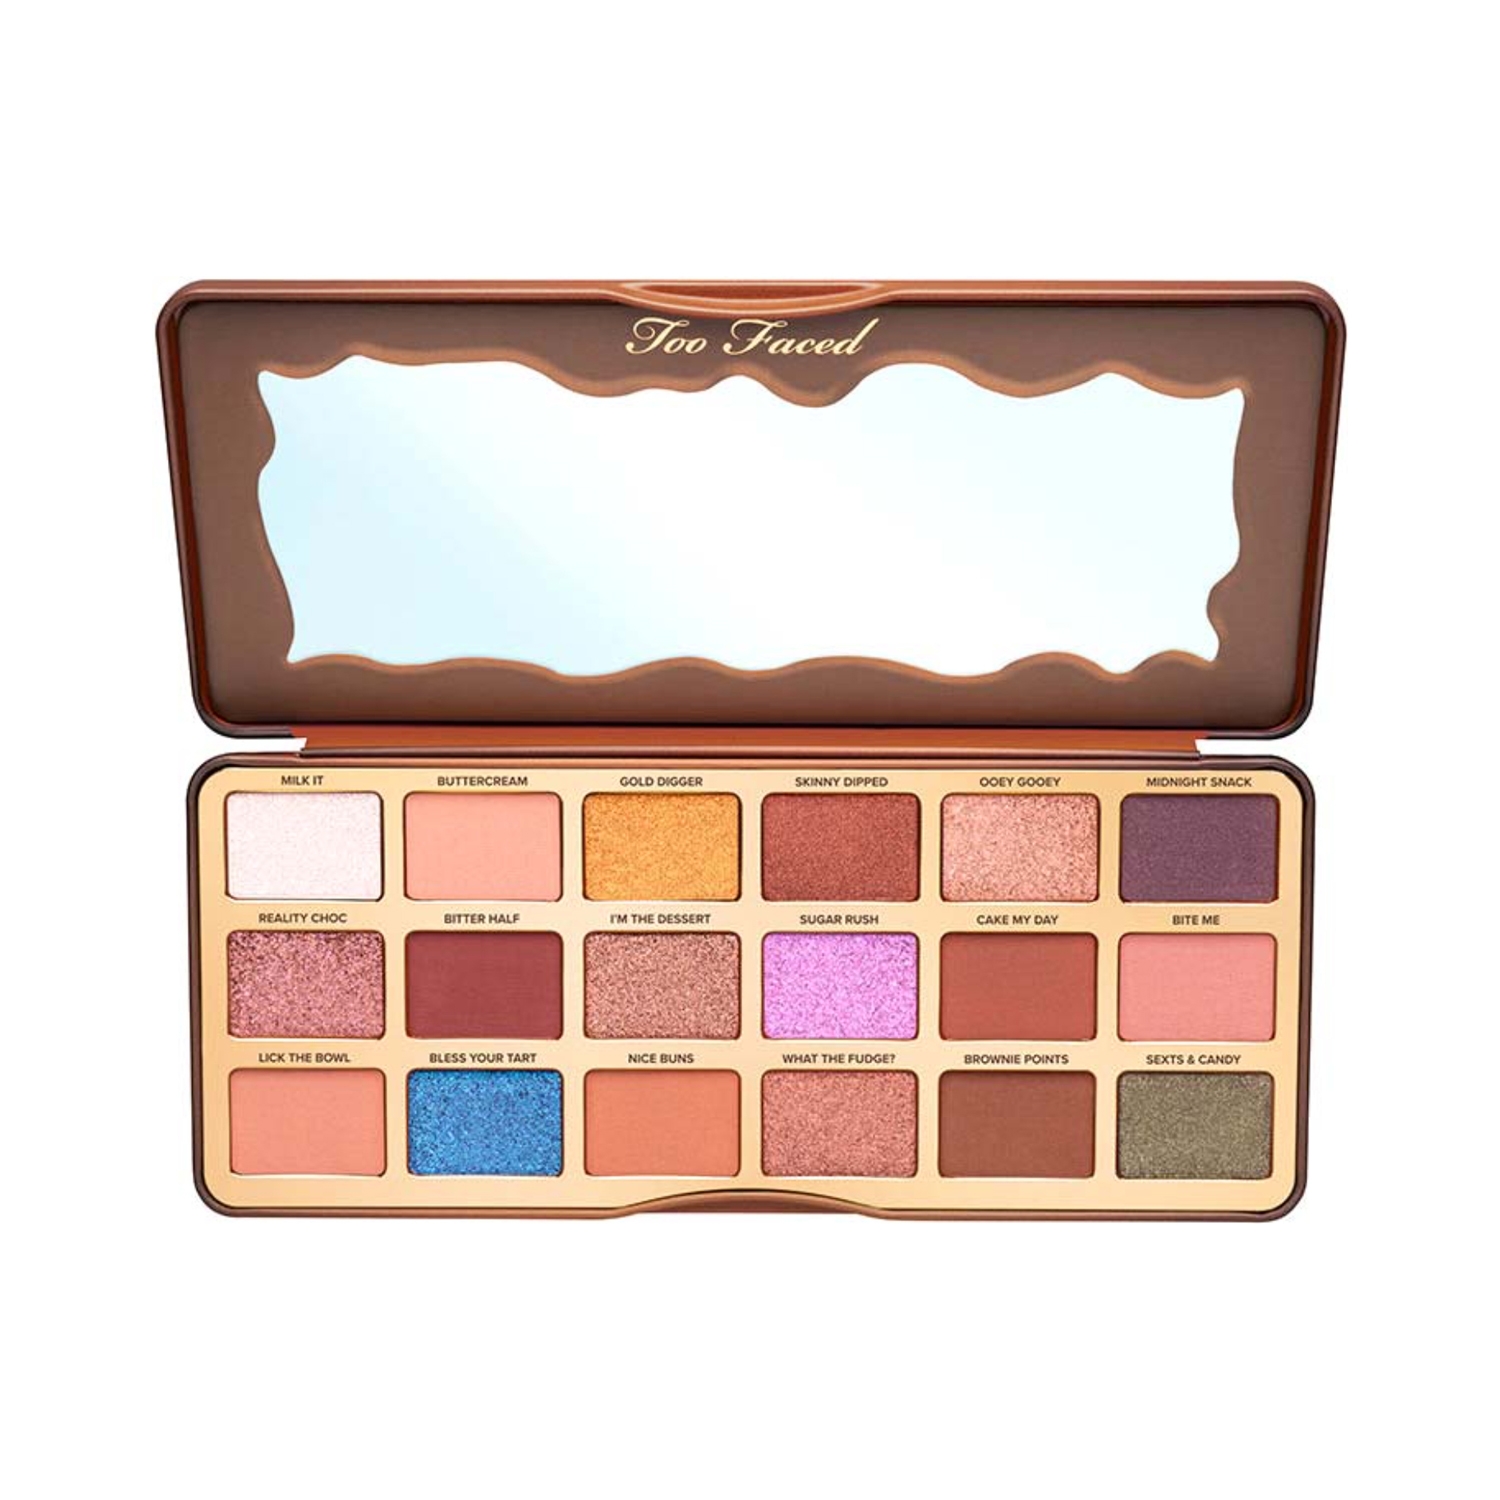 Too Faced | Too Faced Better Than Chocolate Cocoa-Infused Eye Shadow Palette - Multi-Color (19.8g)